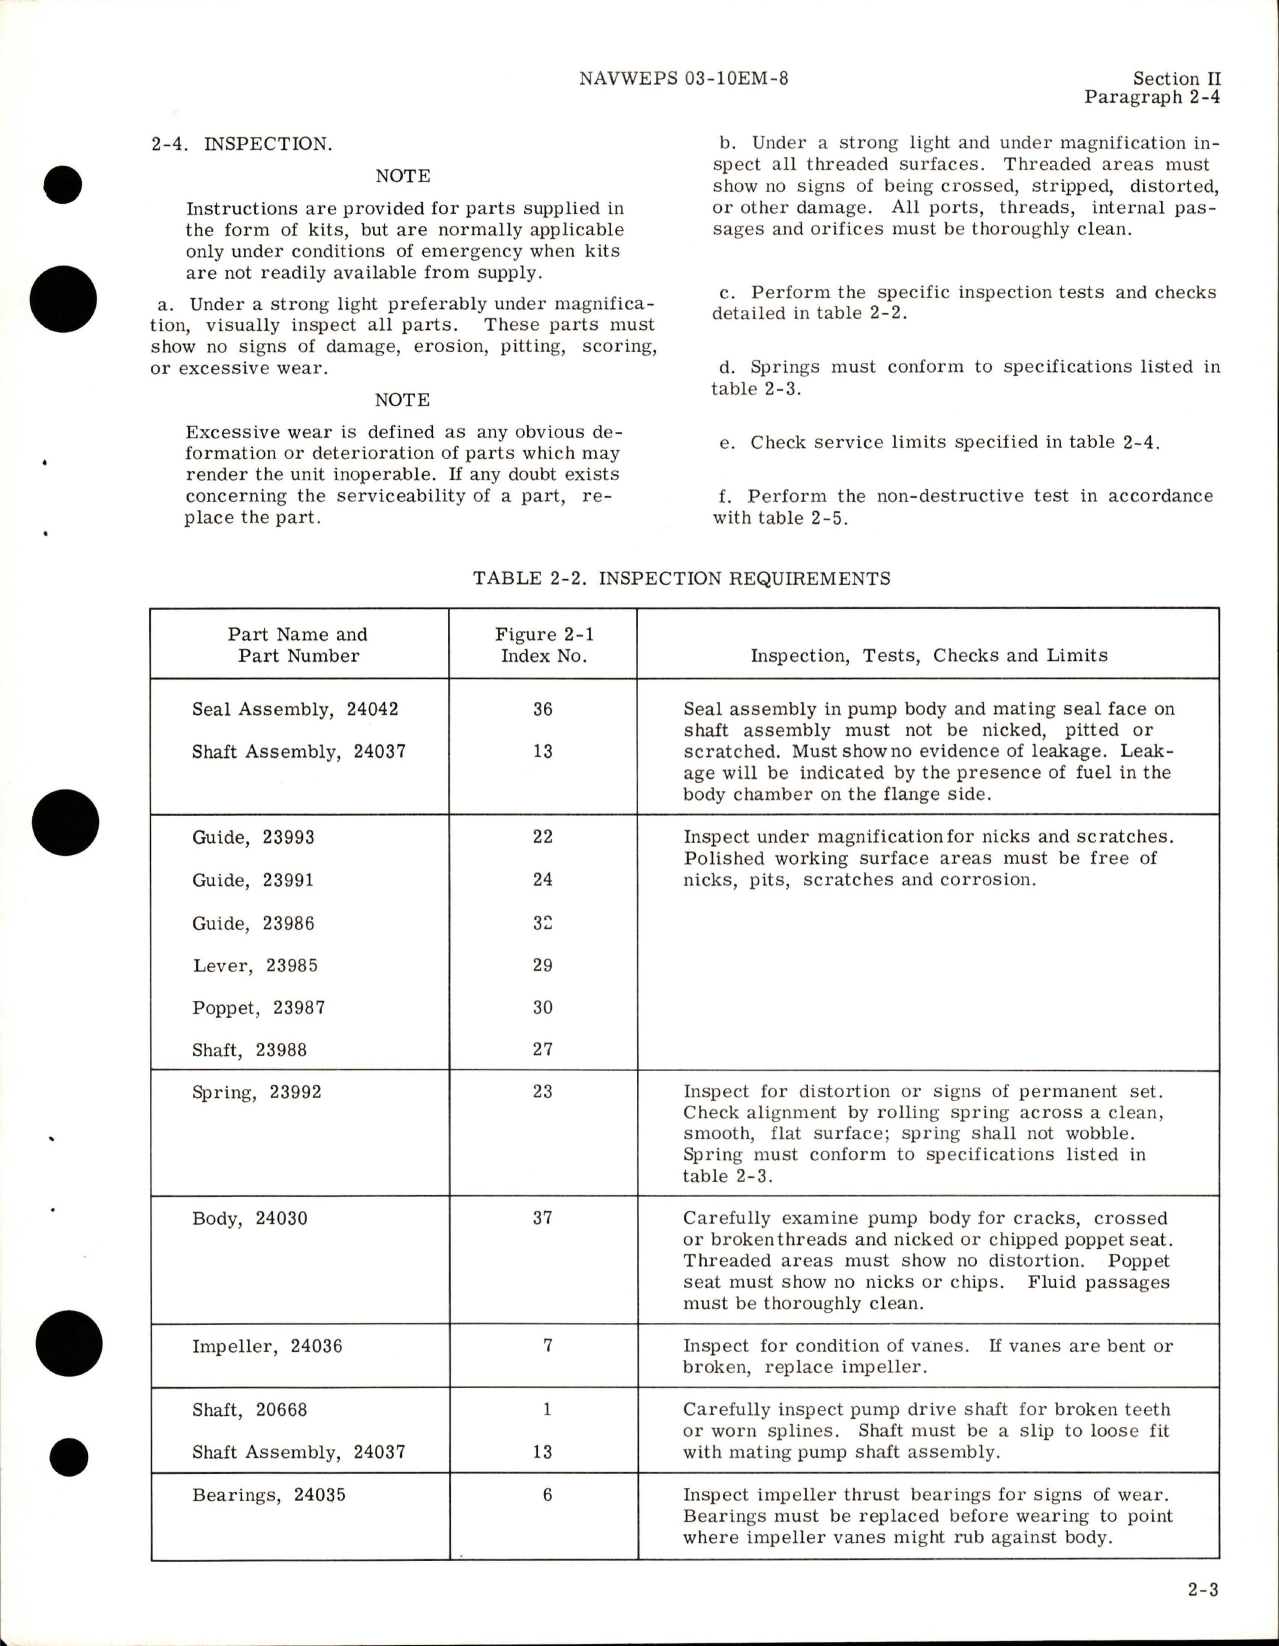 Sample page 7 from AirCorps Library document: Overhaul Instructions for Engine Driven Fuel Boost Pump - Part 23900 and 50138